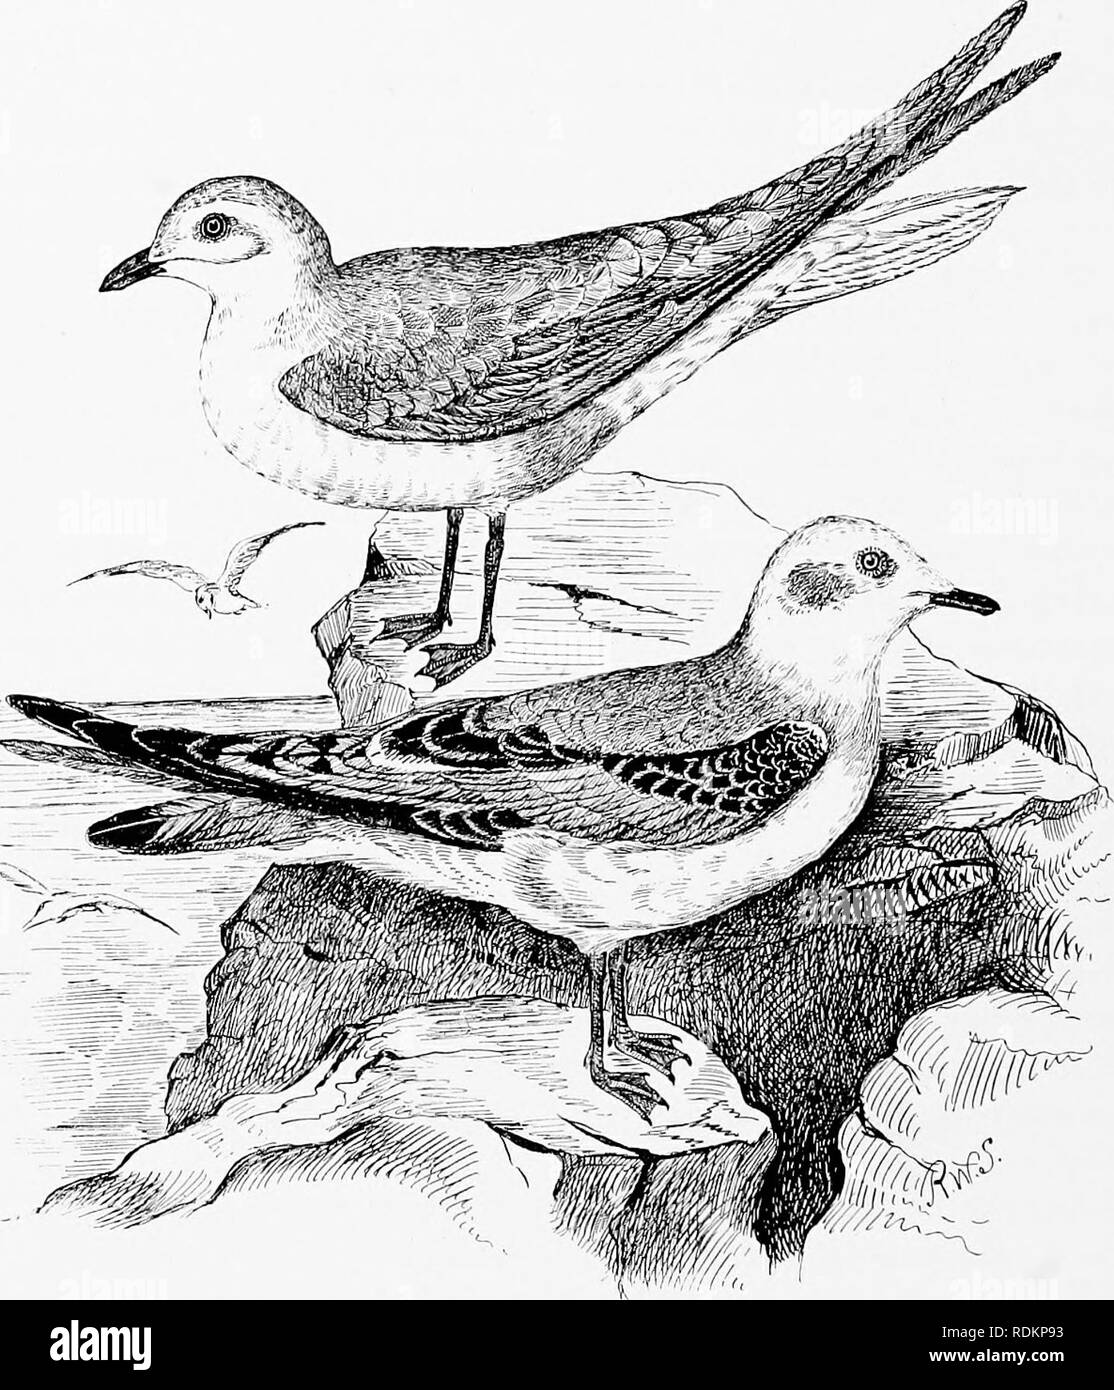 . Chapters on the natural history of the United States. Zoology. 184 CHAPTERS ON THE NATURAL HISTORY near]}- related to such a Tern as the Arctic tern (Sterna para- disoea), while on the other hand the Gull-billed tern (Gelochelidon nilotica) more or less nearly approaches some of the stouter- formed gulls of the genus Larus. As for the Black skimmer. Fig. 49. Ross's Gull (Hhodostethia rosea). (Reduced.) Ttie upper figure is an adult male in winter plumage ; the lower one, a young female of the first autumn. Drawn by the Author.* (Rynchops nigra), I have elsewhere called attention to what is b Stock Photo